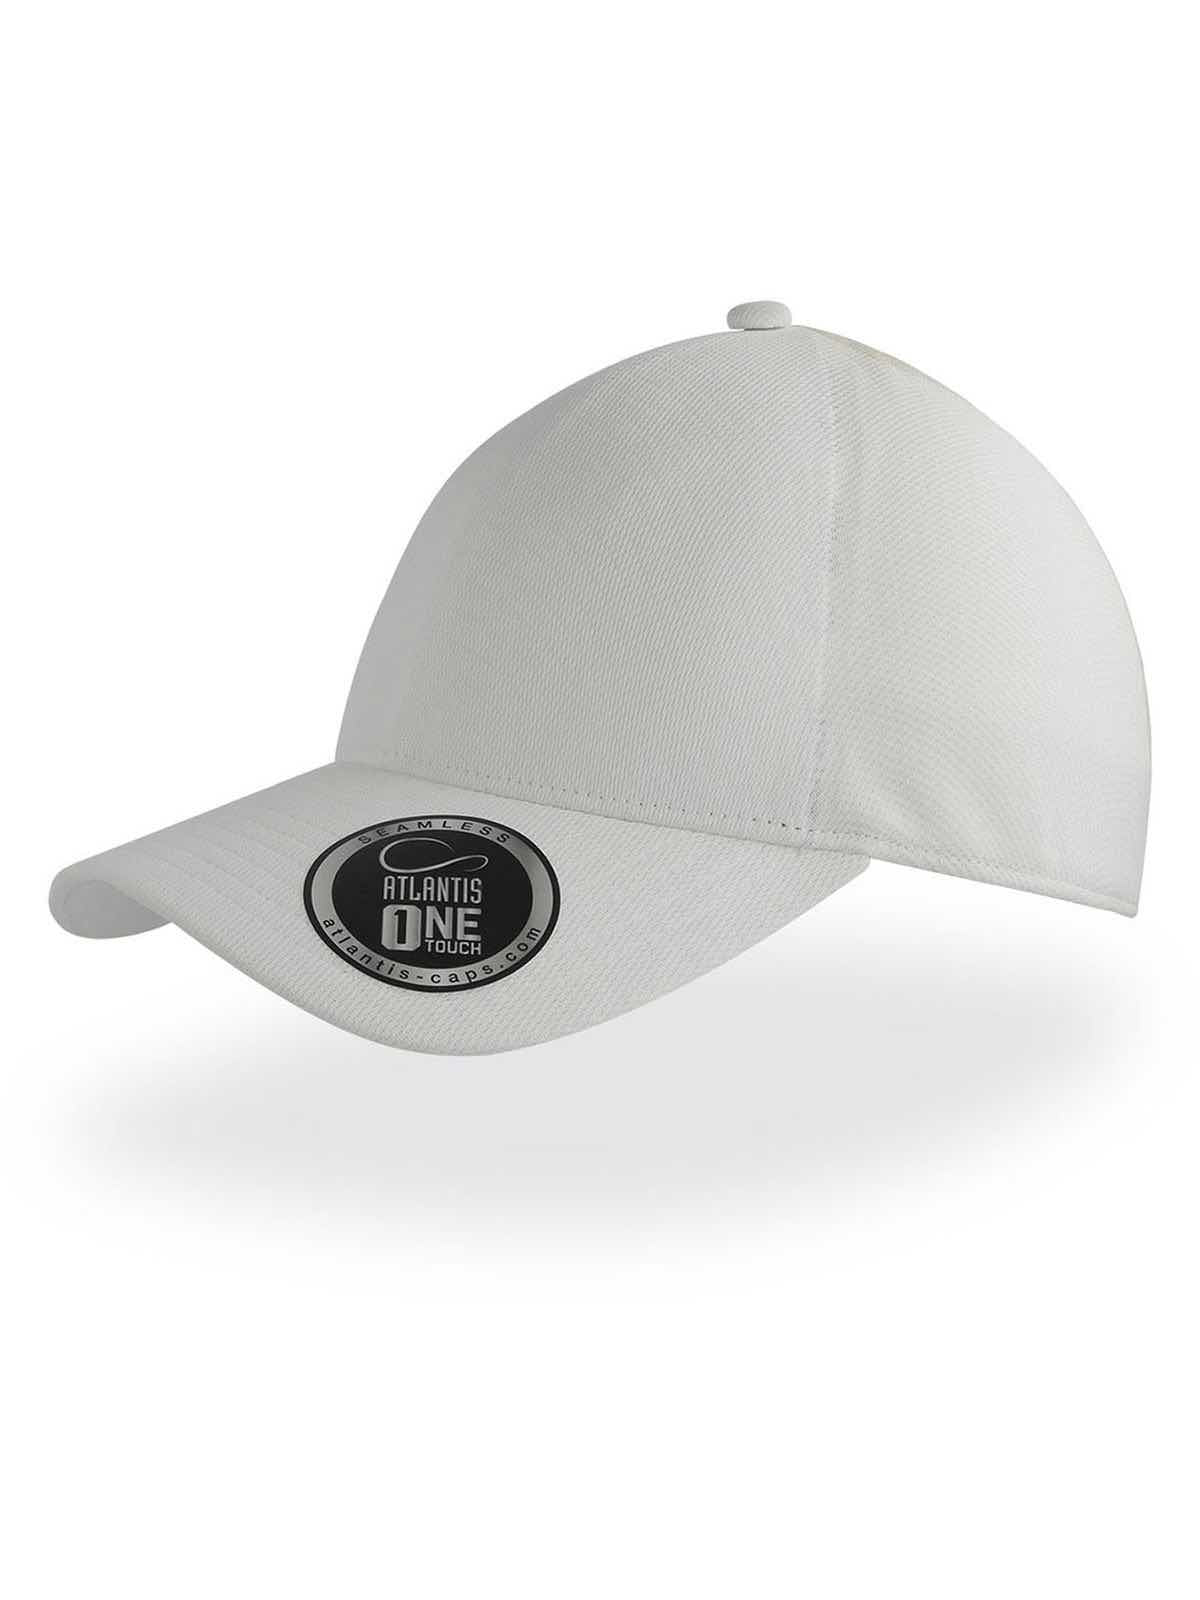 Gorra de Golf One-Touch personalizable blanca WE SPORTED